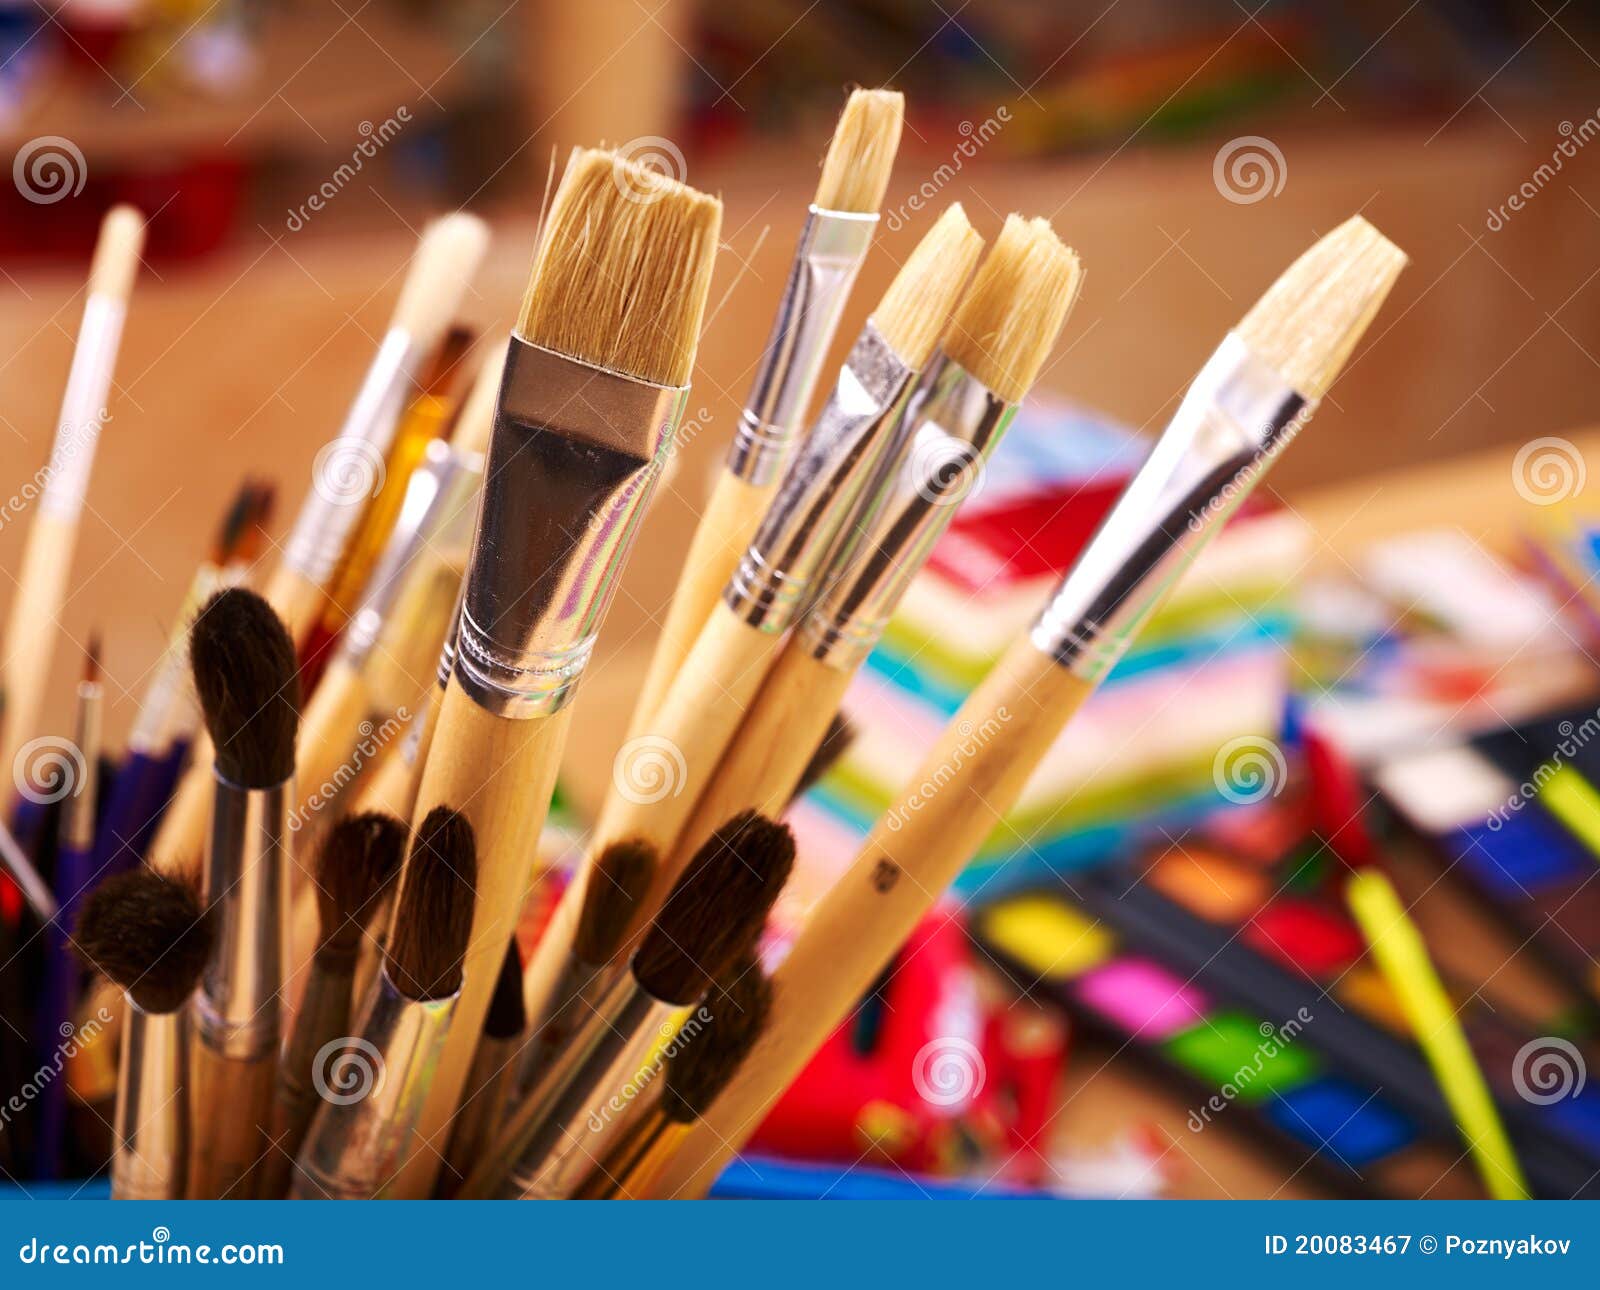 Artwork Workplace Creative Accessories Art Tools Painting Drawing Art  Supplies Stock Photo by ©borjomi88 202829928